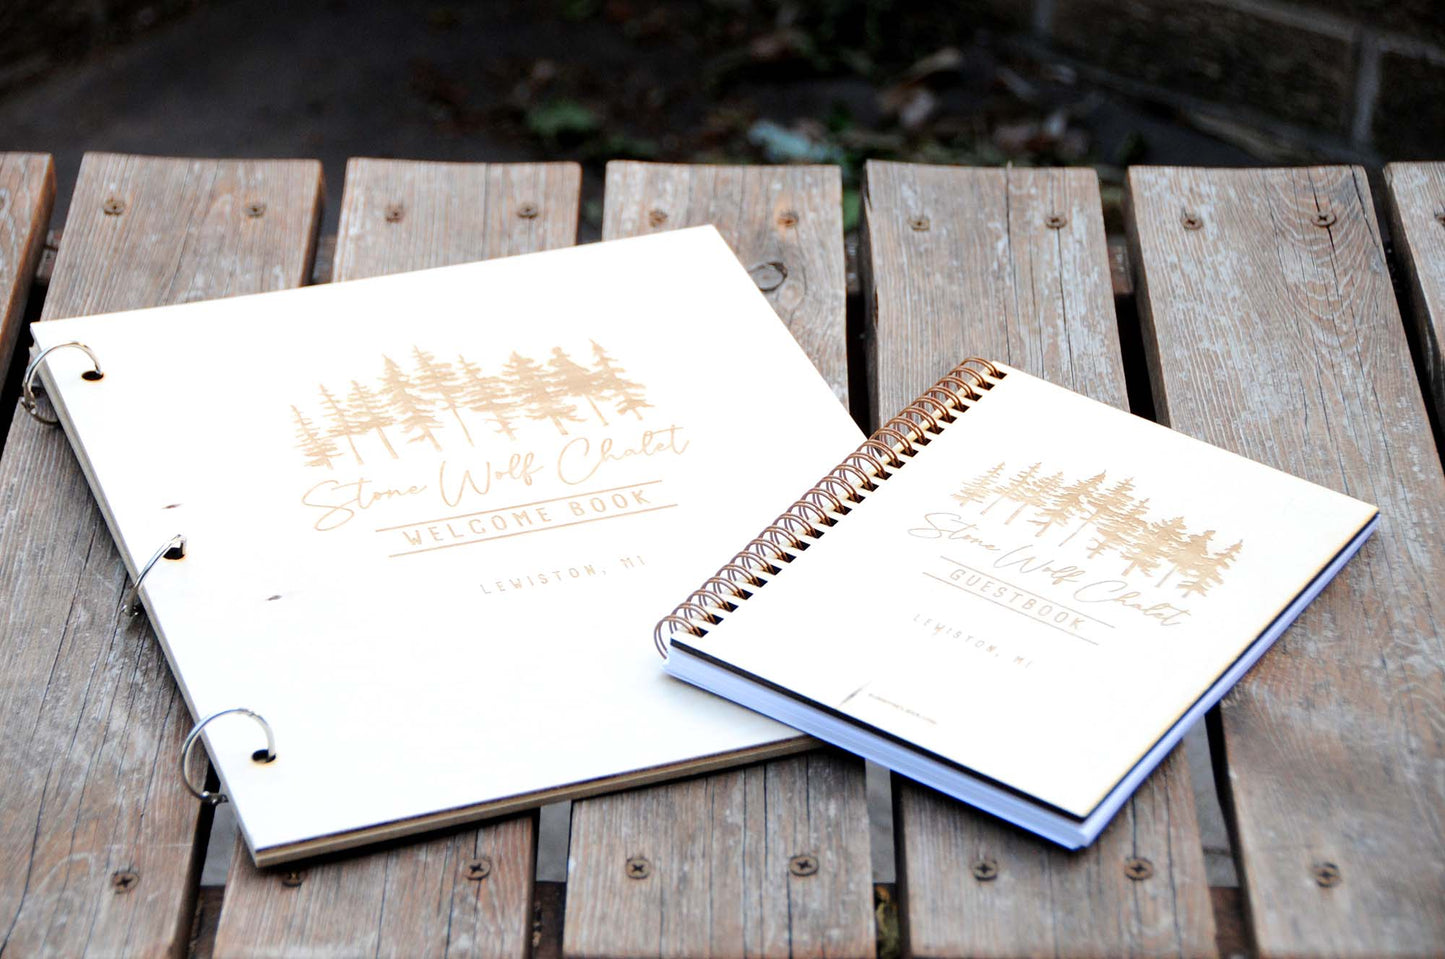 AirBNB Welcome Book Binder, Tree Bunch, Pines Silhouette, Personalized Vacation Home Rental Book